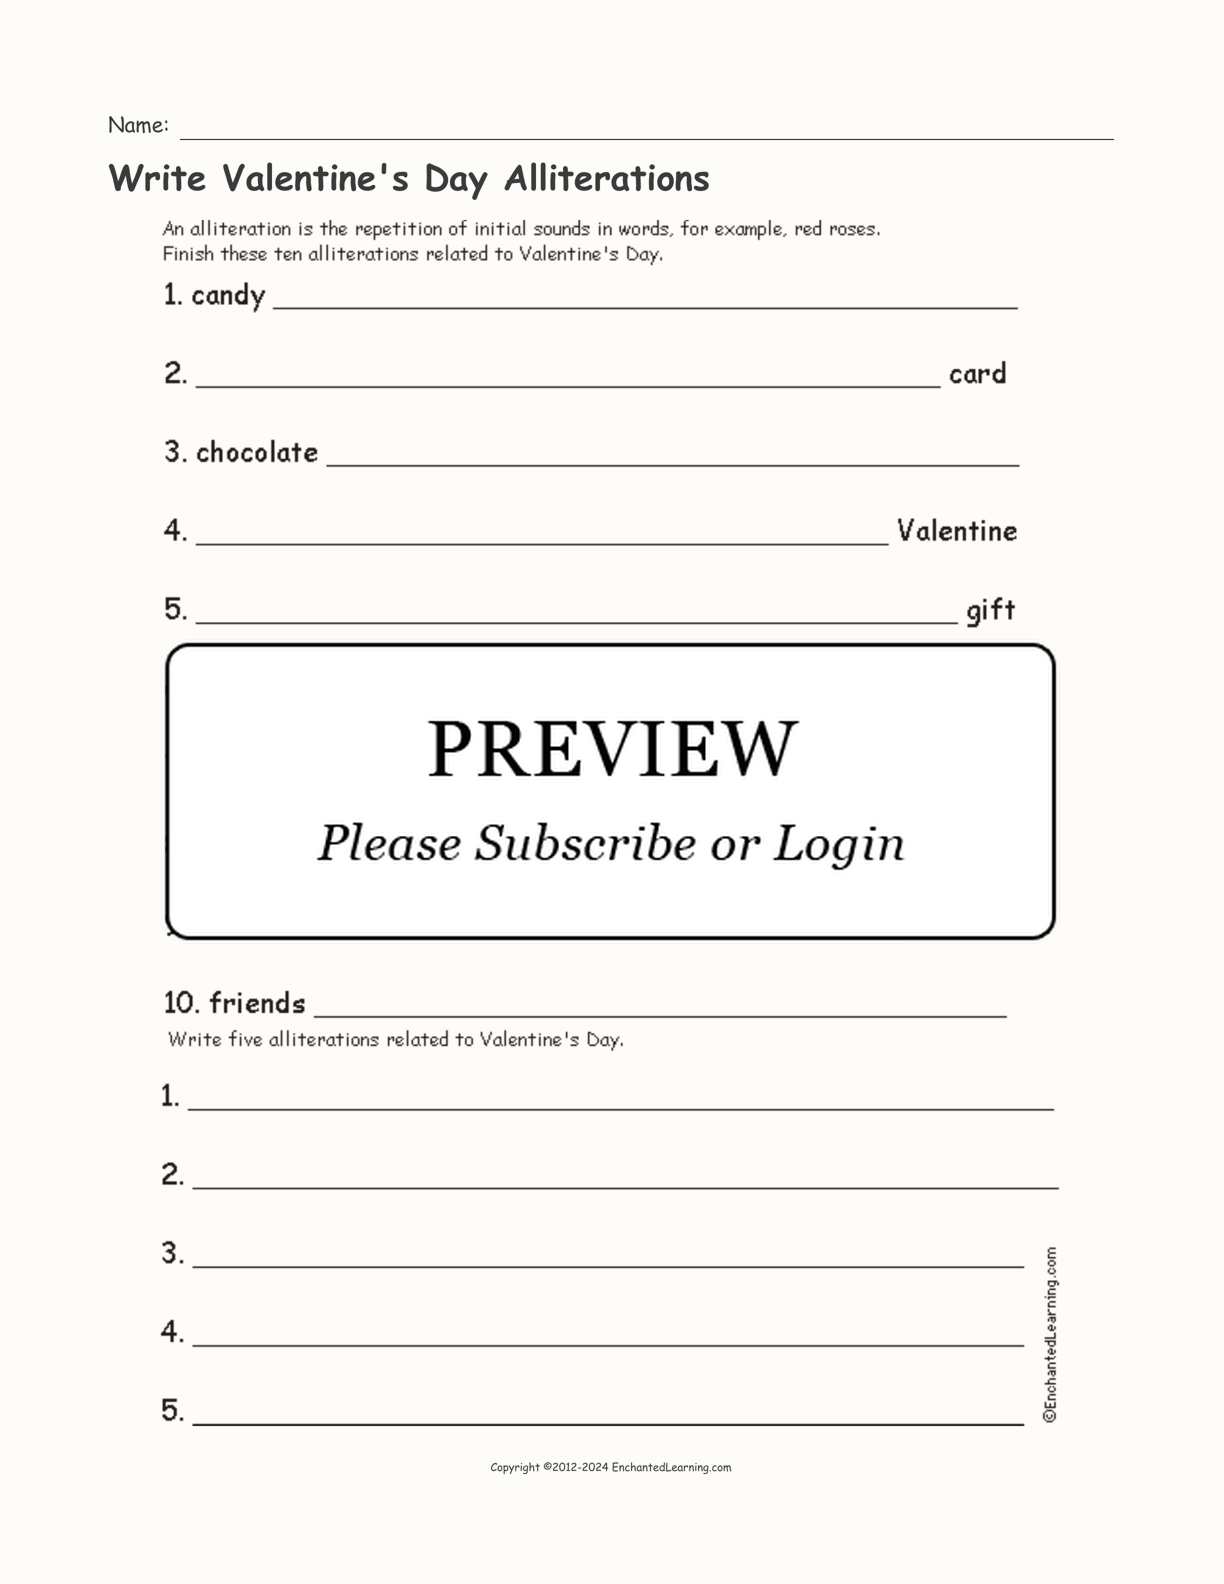 Write Valentine's Day Alliterations interactive printout page 1